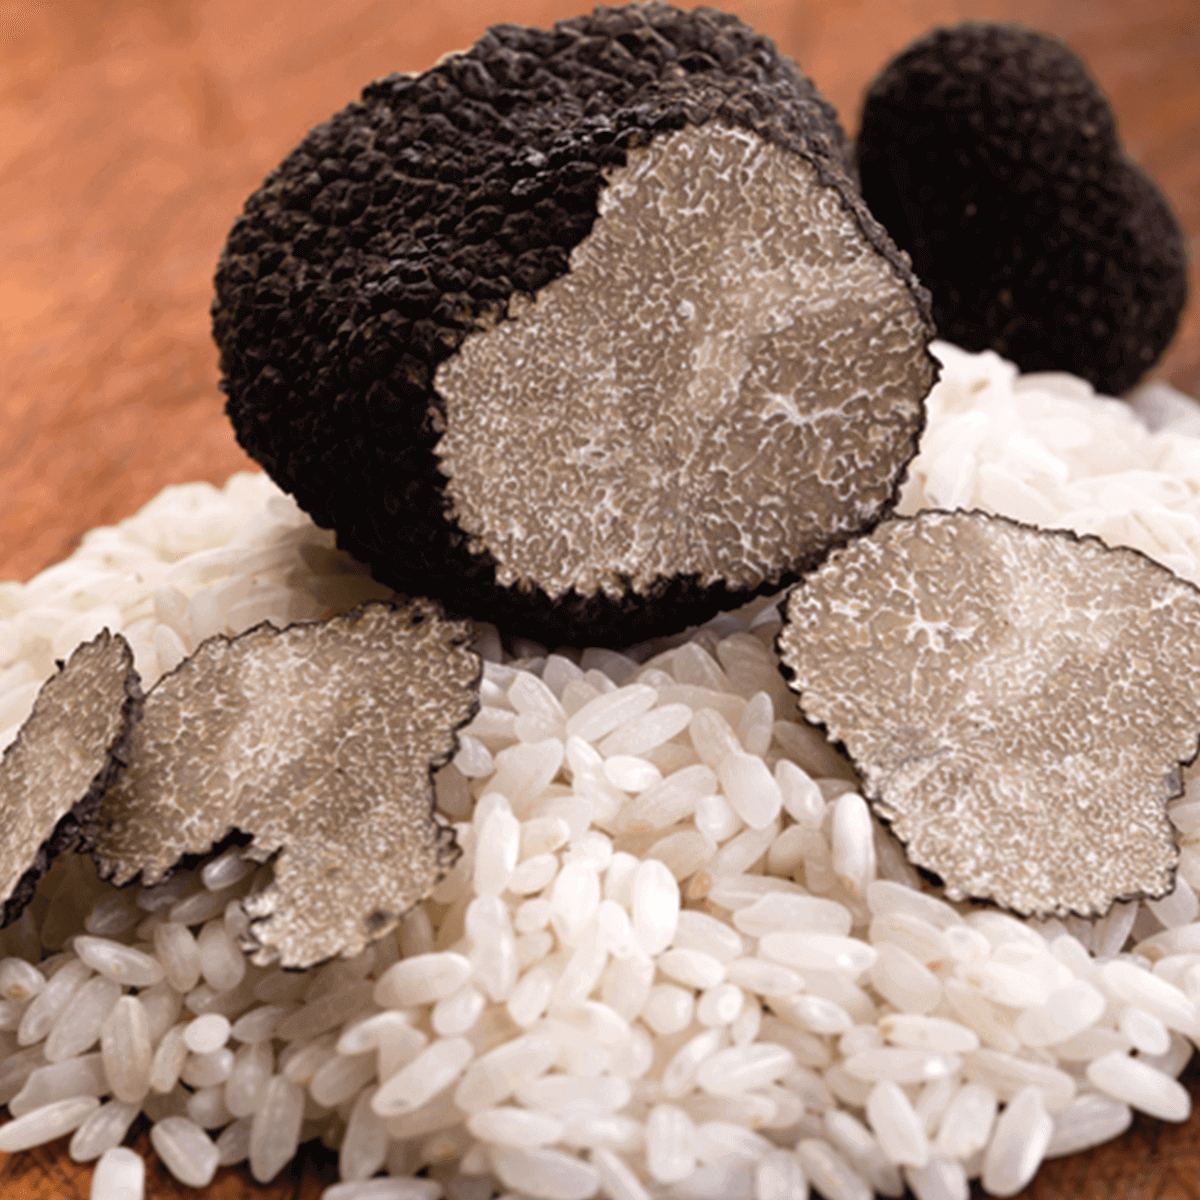 rice-with-truffle-bits-2